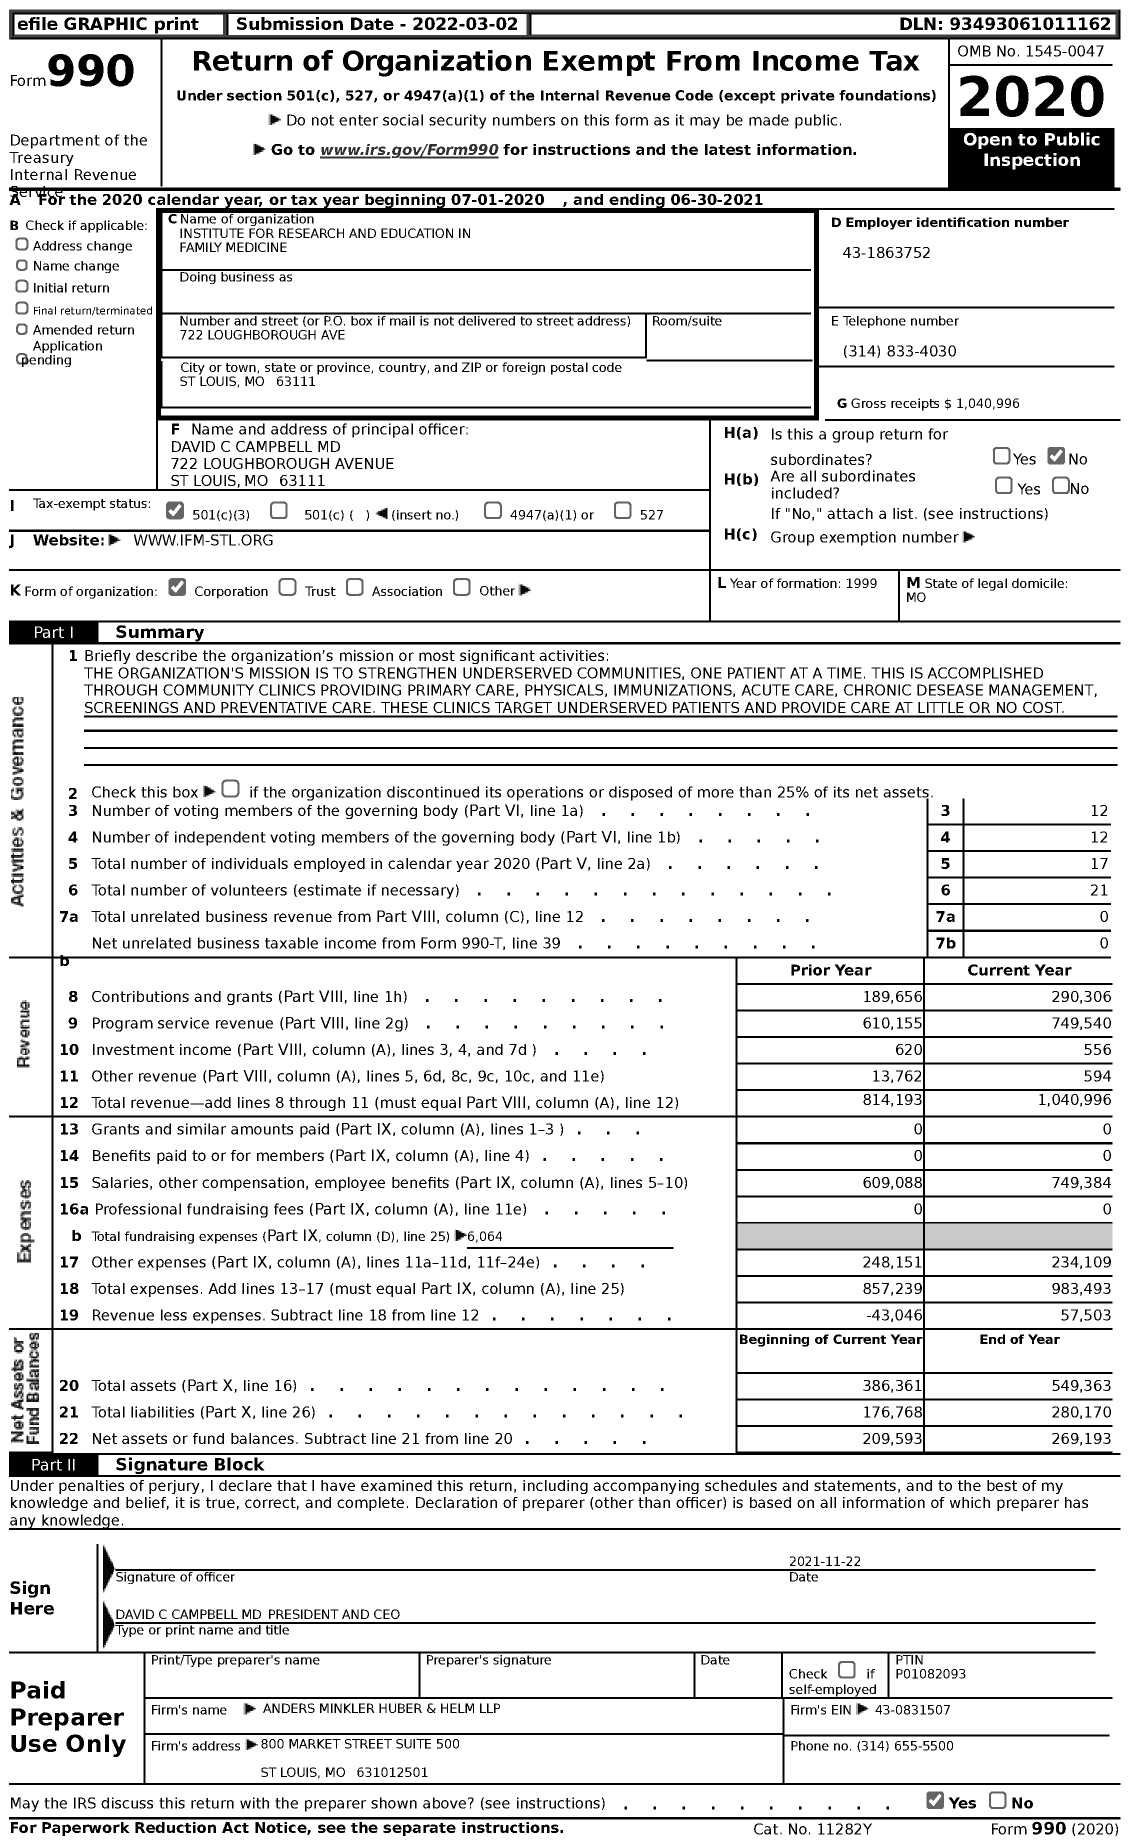 Image of first page of 2020 Form 990 for Institute for Research and Education in Family Medicine